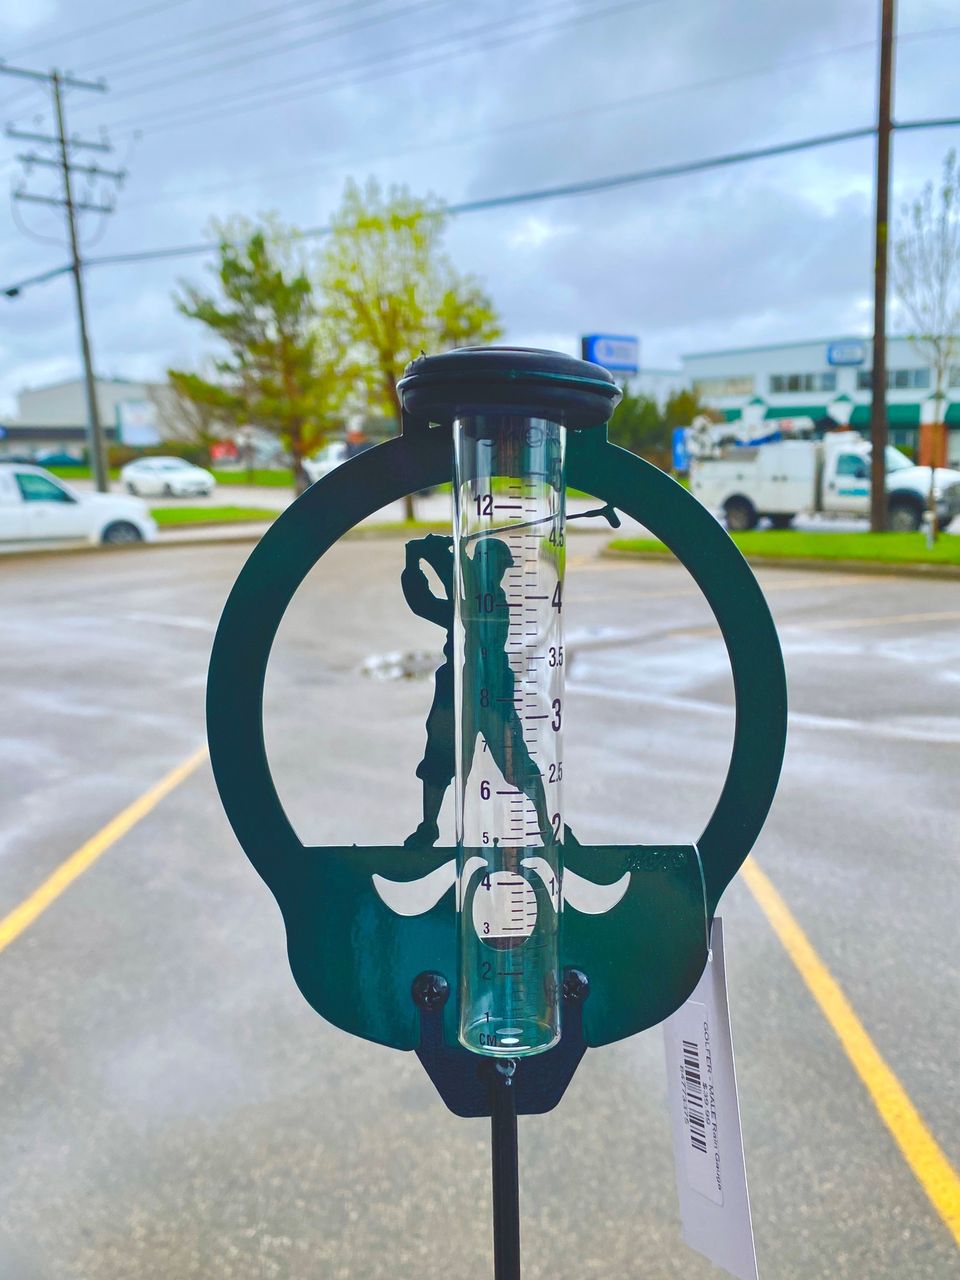 ️✨ Check out the coolest rain gauges around! Who doesn't love tracking the rain? These beauties are  Pinetree Innovations Saskatoon (306)477-3236